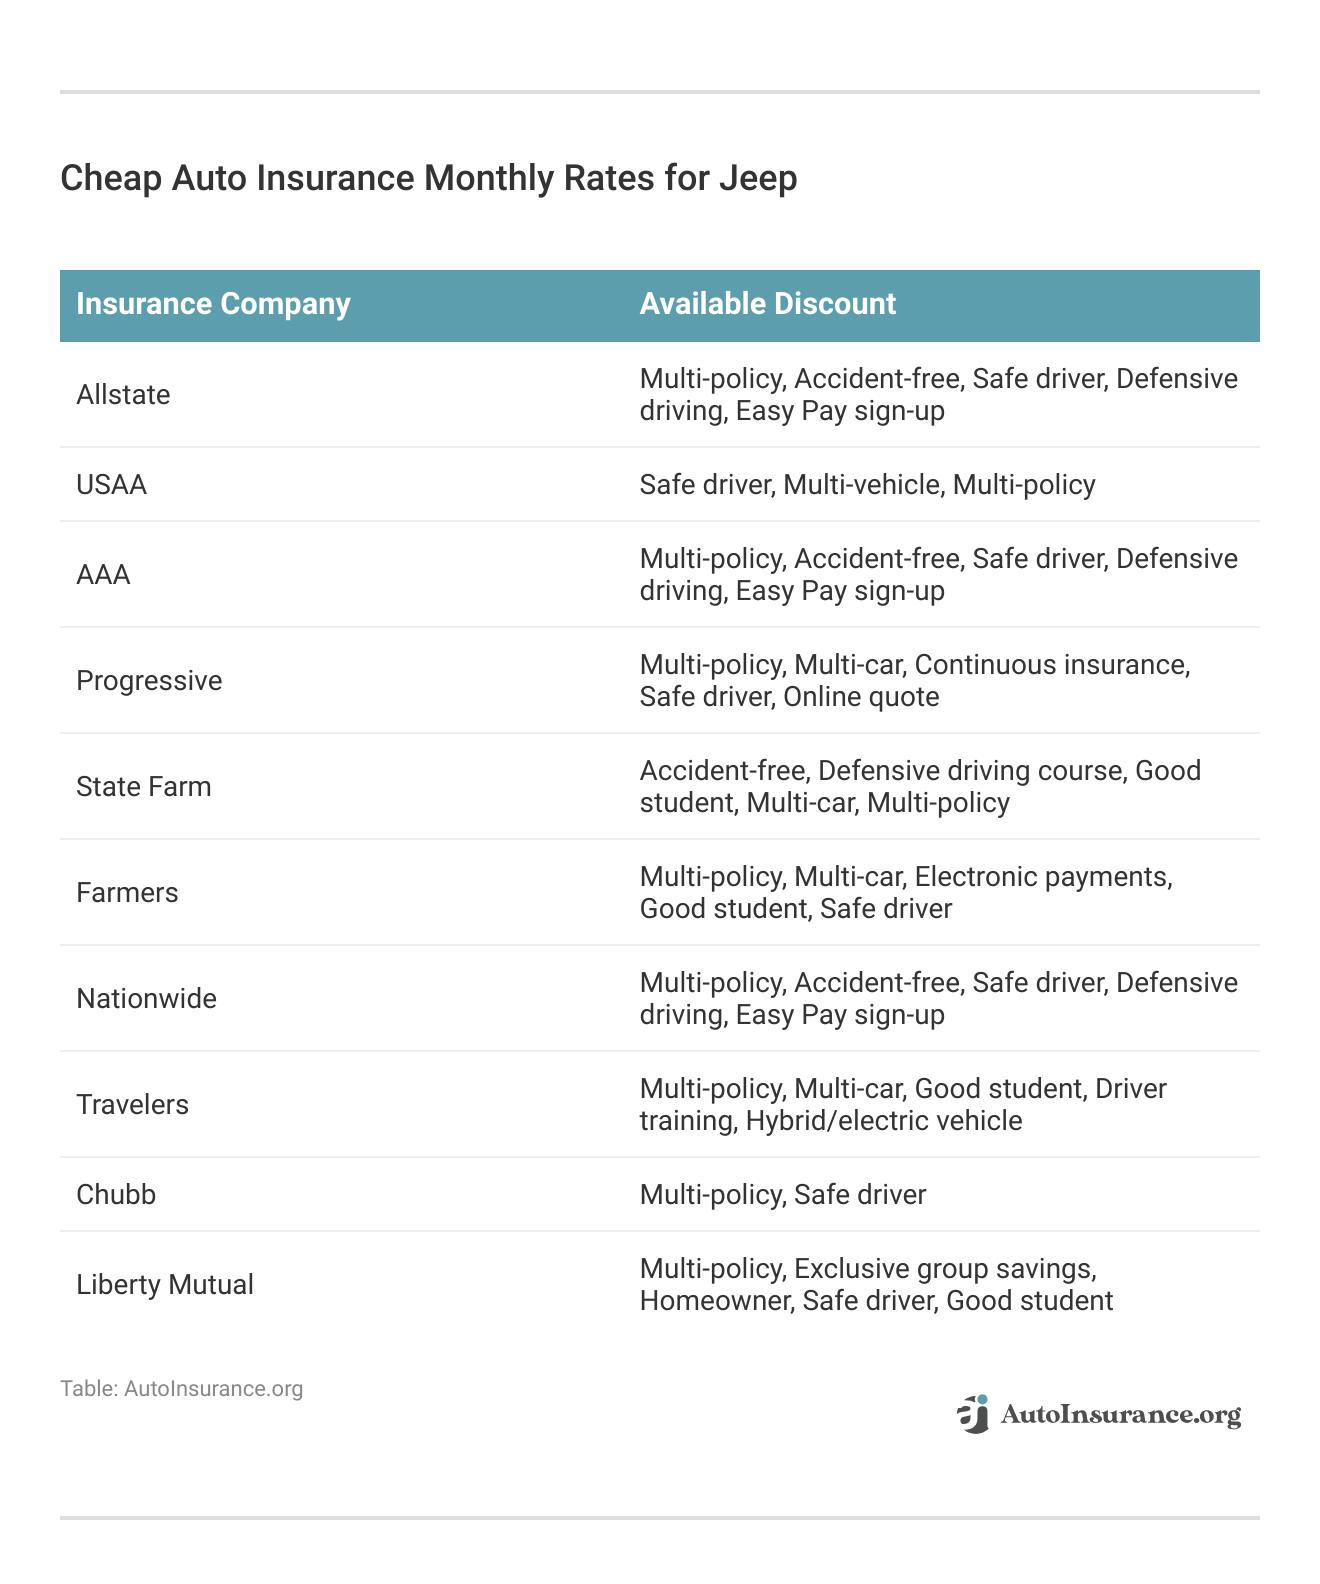 <h3>Cheap Auto Insurance Monthly Rates for Jeep</h3>